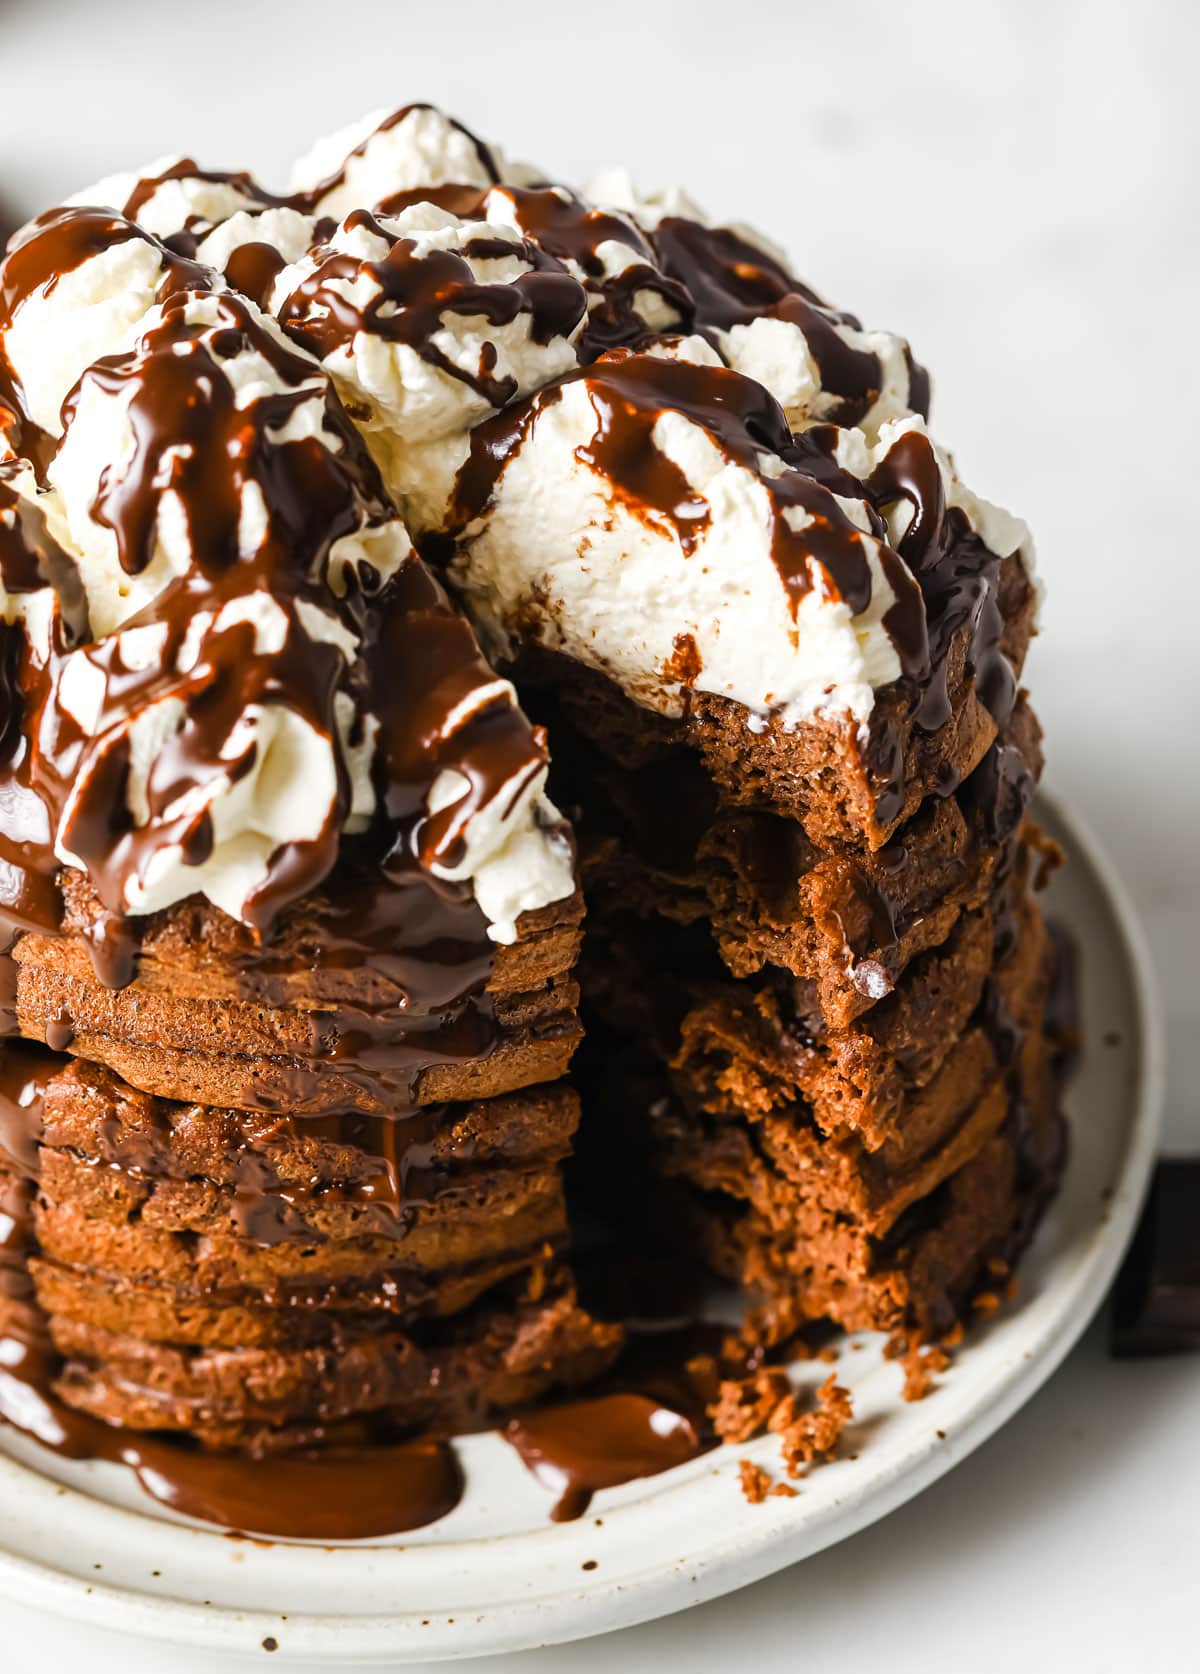 a stack of chocolate Chaffles sliced like a cake, showing the inside, and topped with whipped cream and chocolate sauce